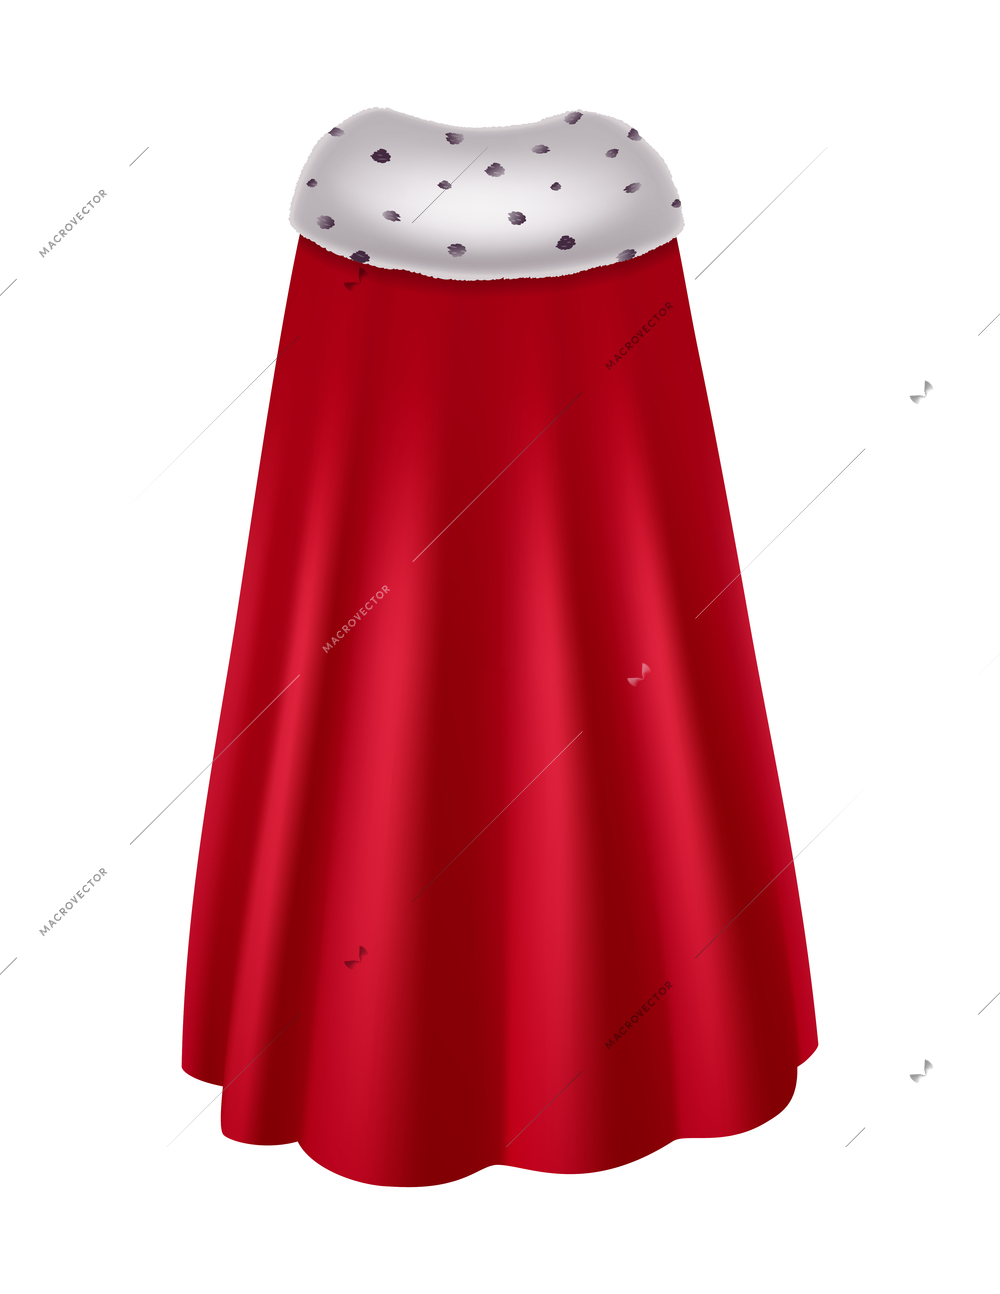 Red royal mantle with white fur realistic vector illustration